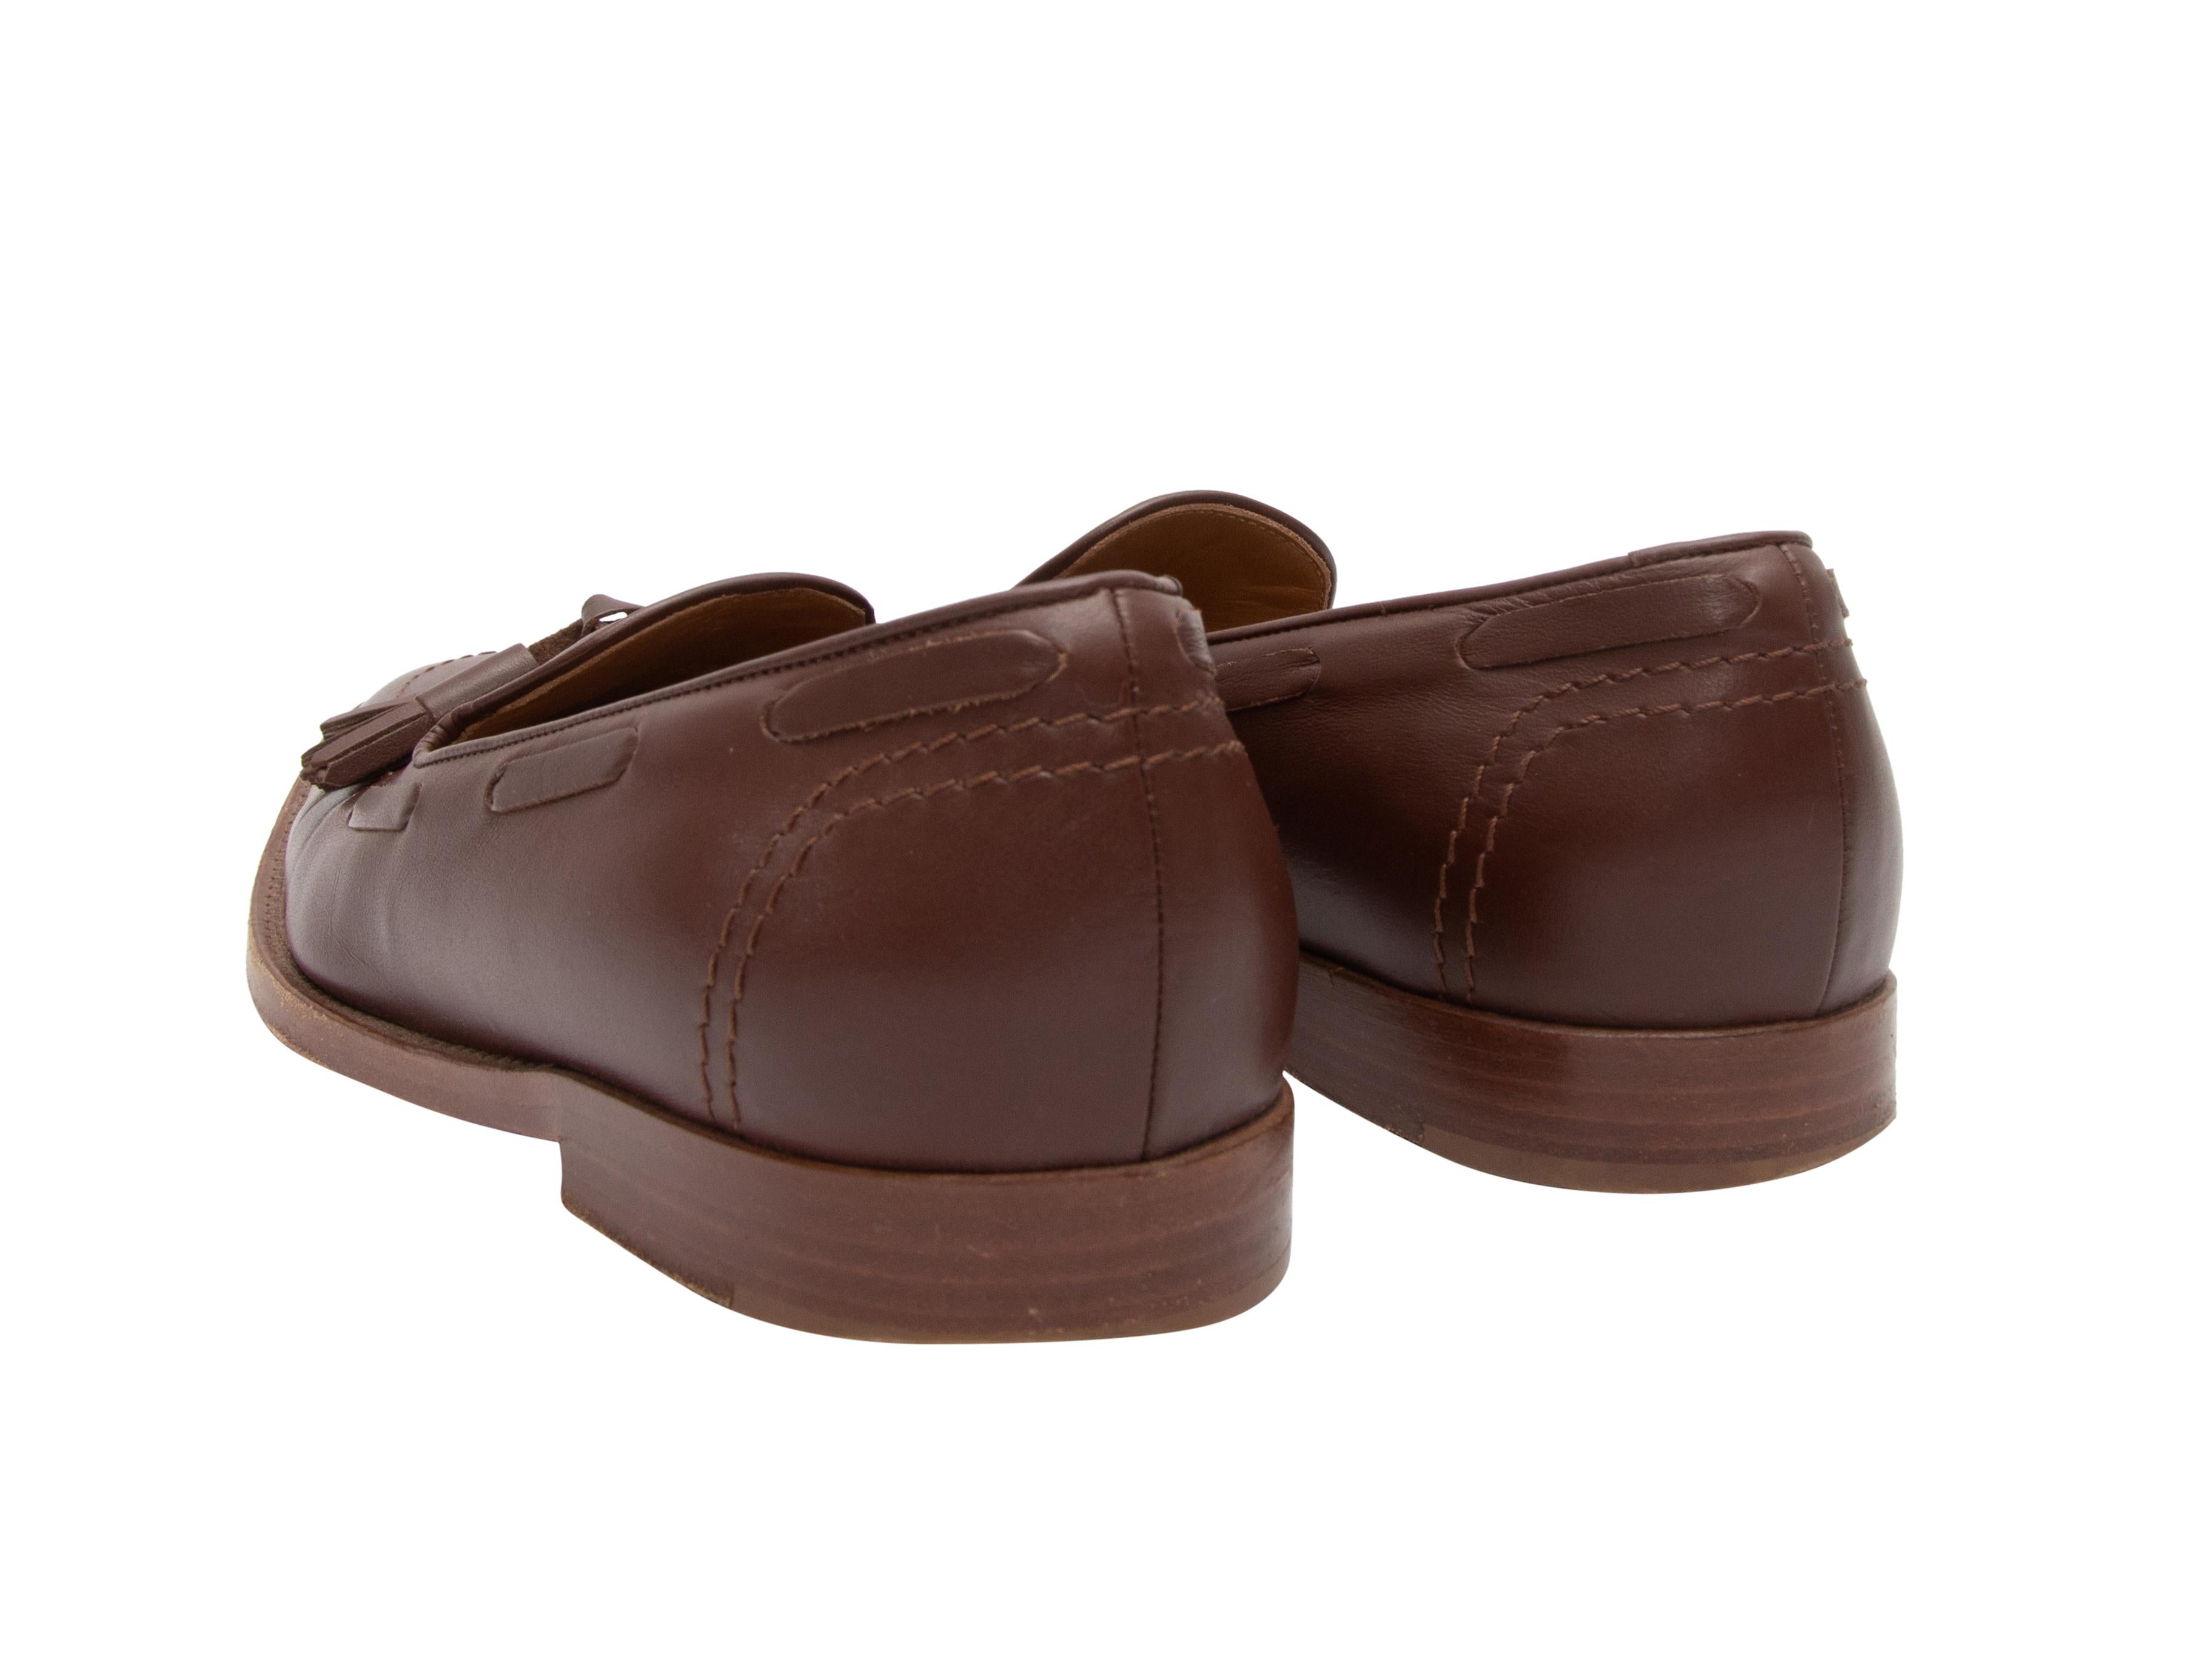 Mansur Gavriel Brown Leather Loafers With Tassel Size 7 For Sale 1